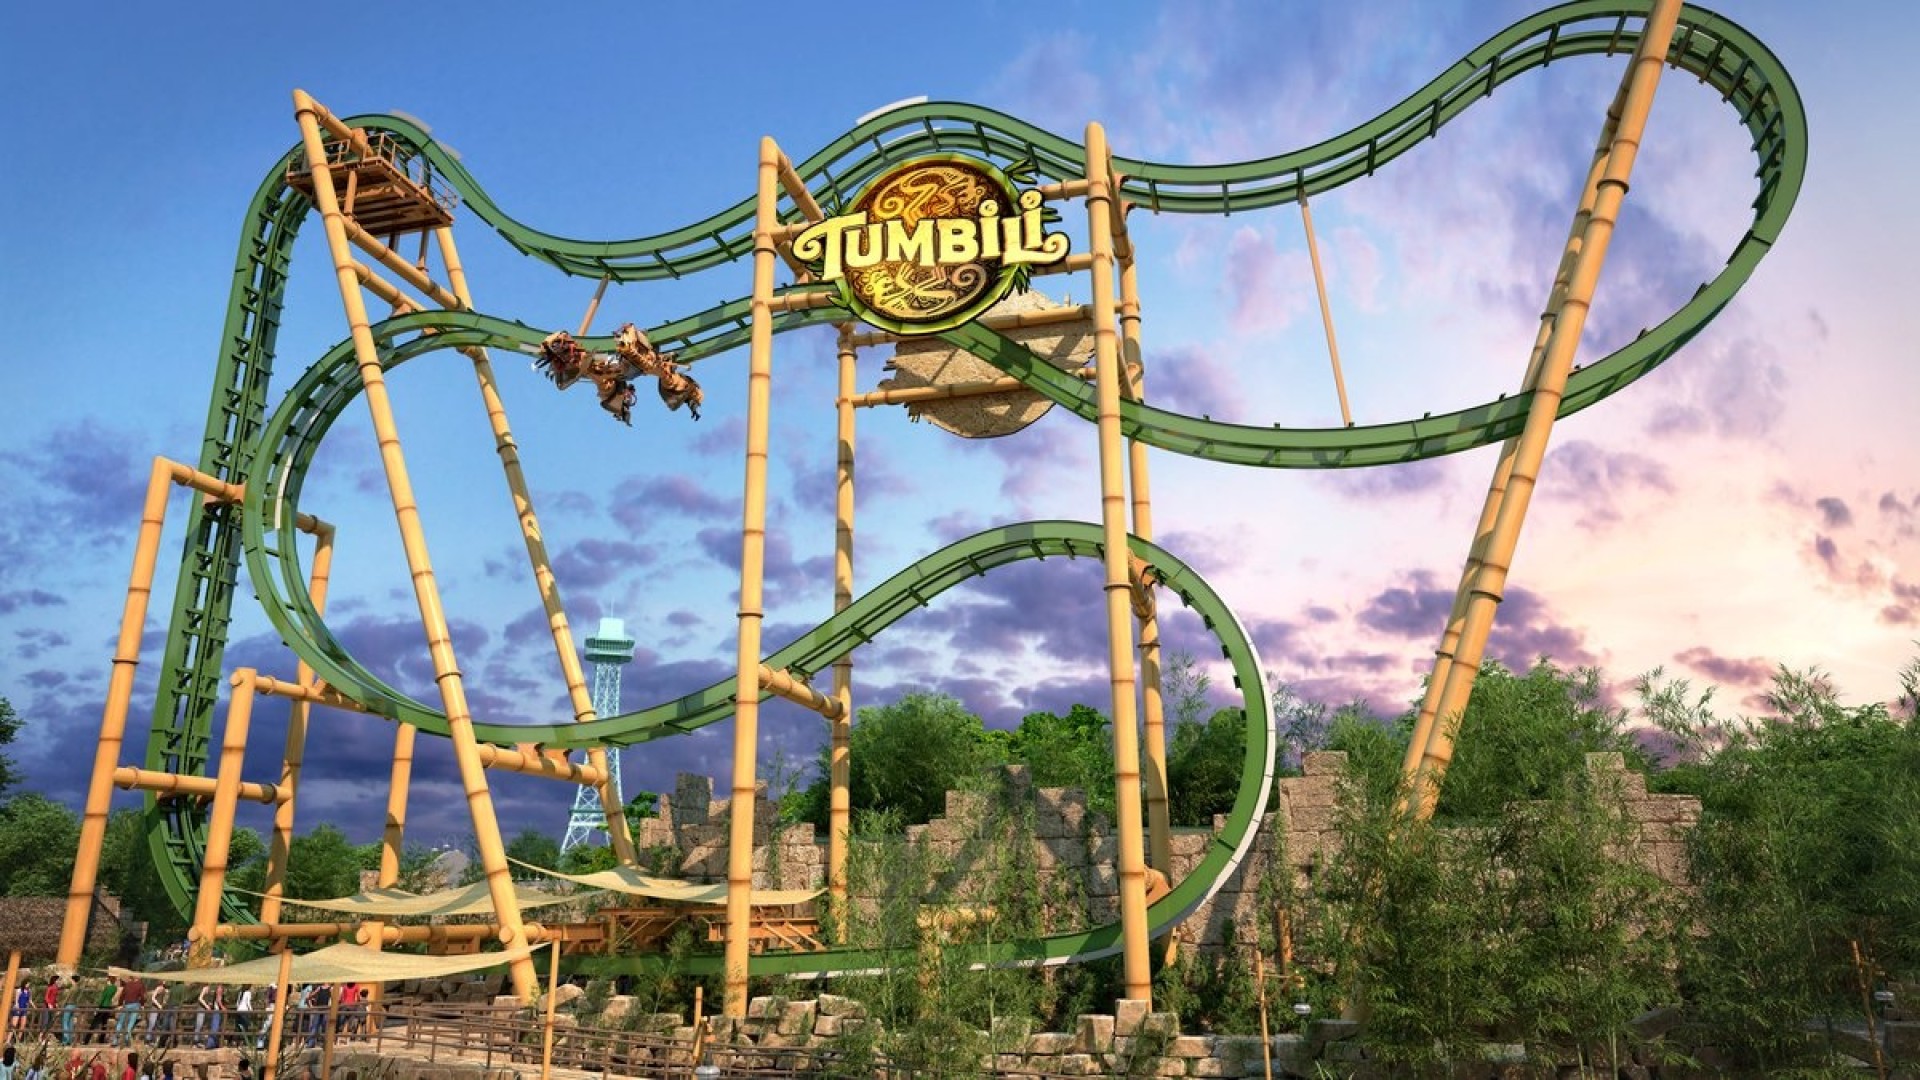 Kings Island 2022 Calendar Kings Dominion To Debut New 4D Roller Coaster In 2022